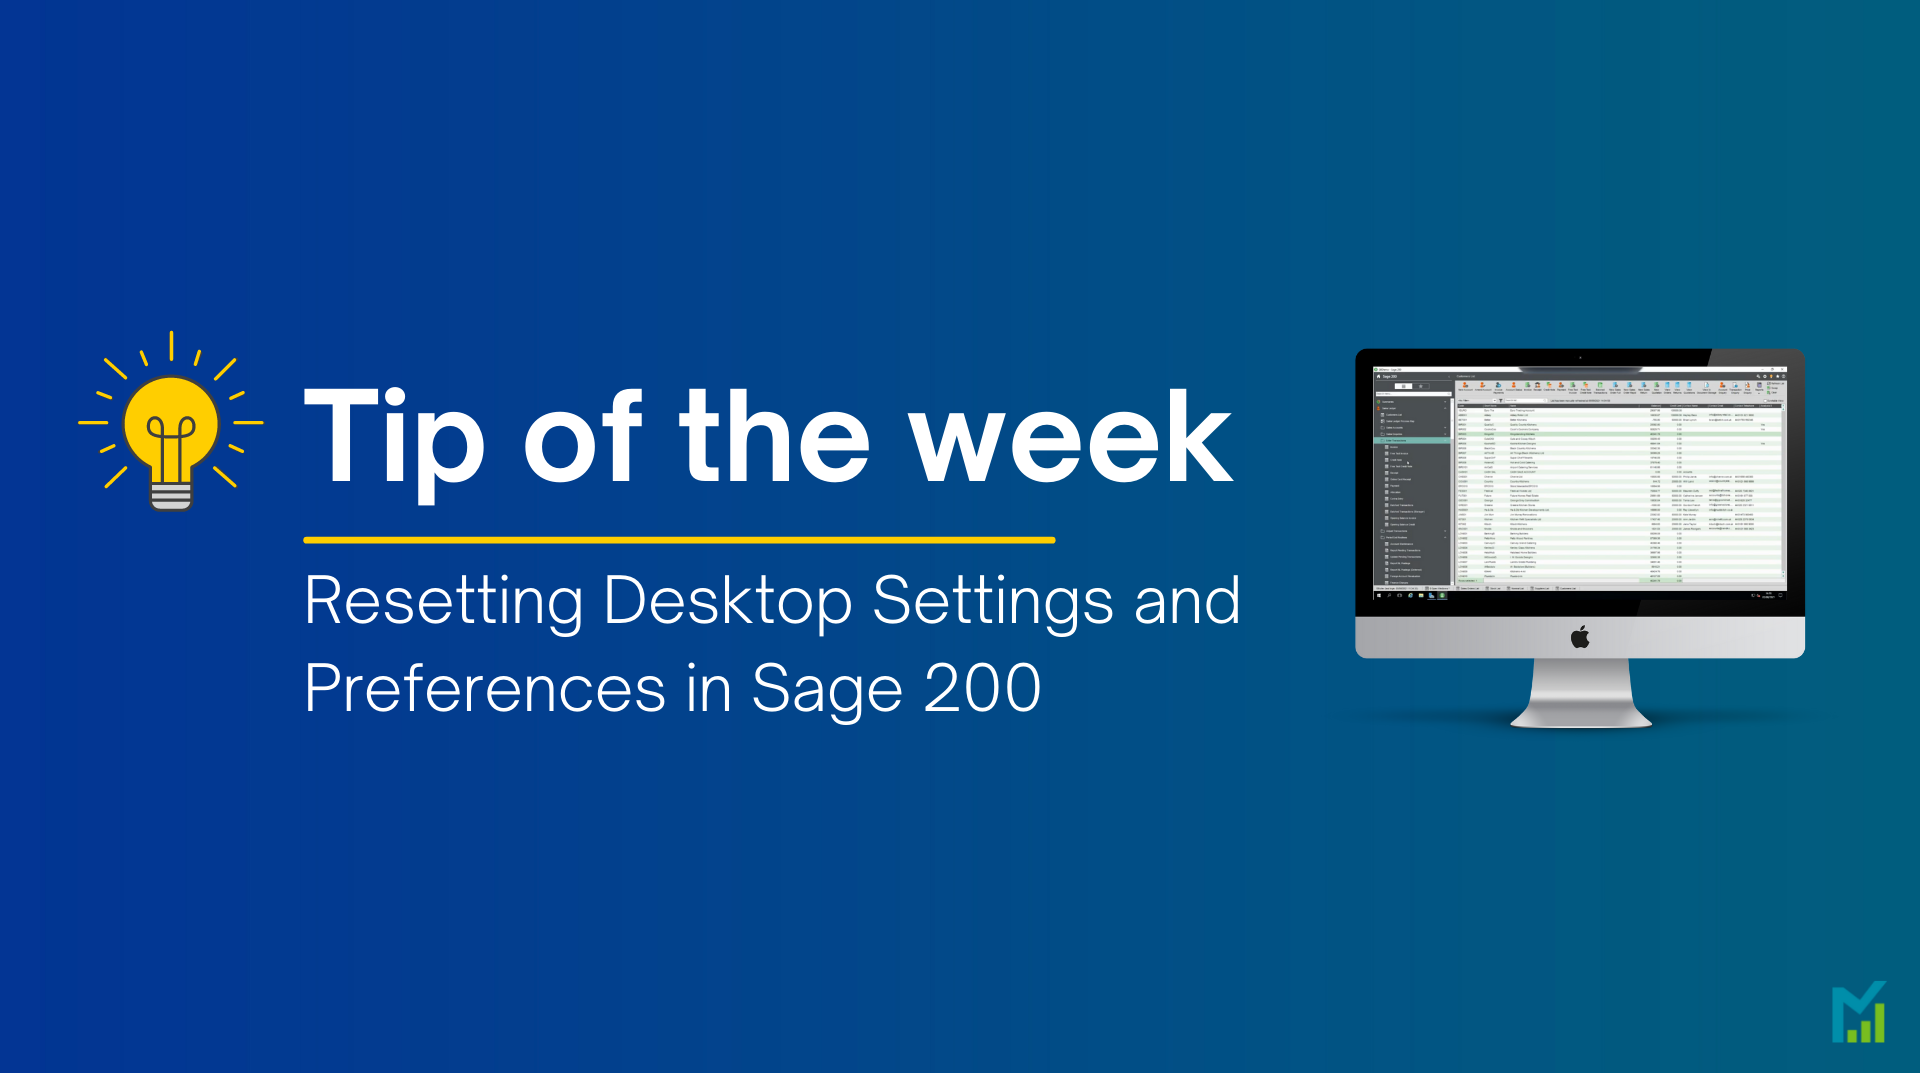 Resetting Desktop Settings and Preferences in Sage 200